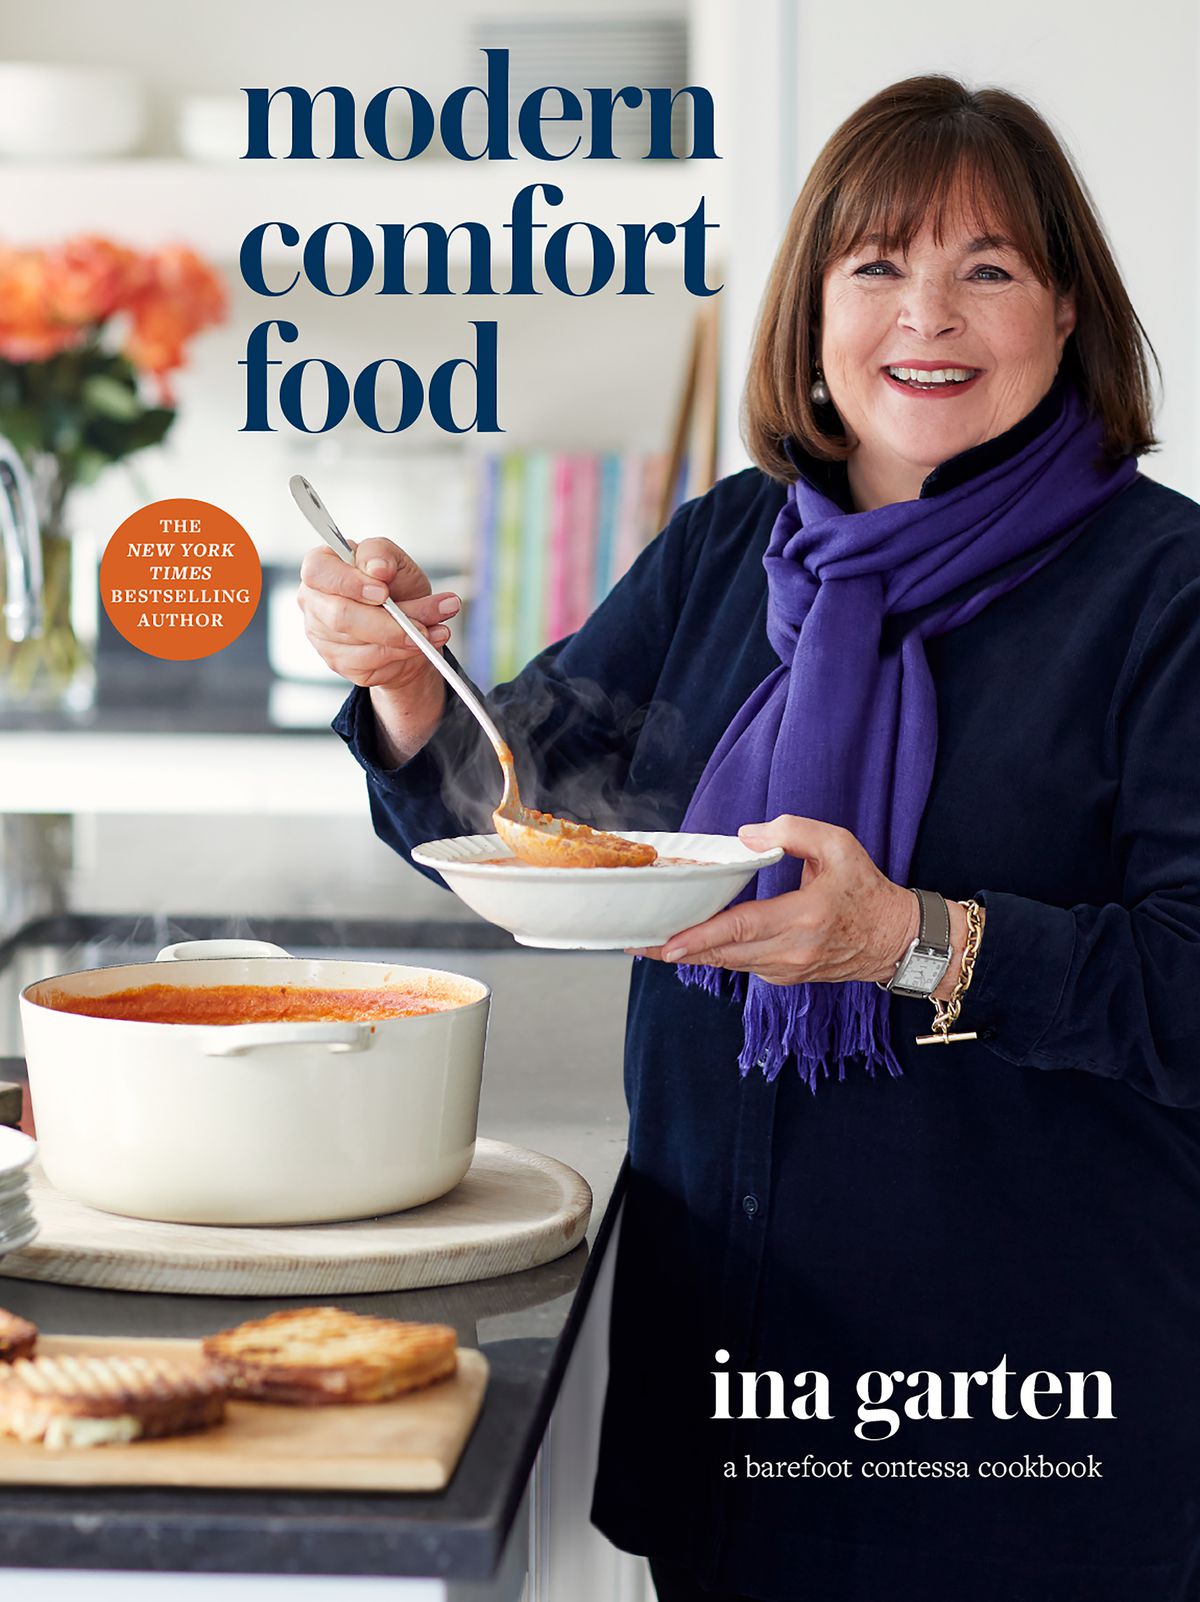 Ina Garten holding a bowl of soup and wearing a purple scarf on the cookbook cover for Modern Comfort Food